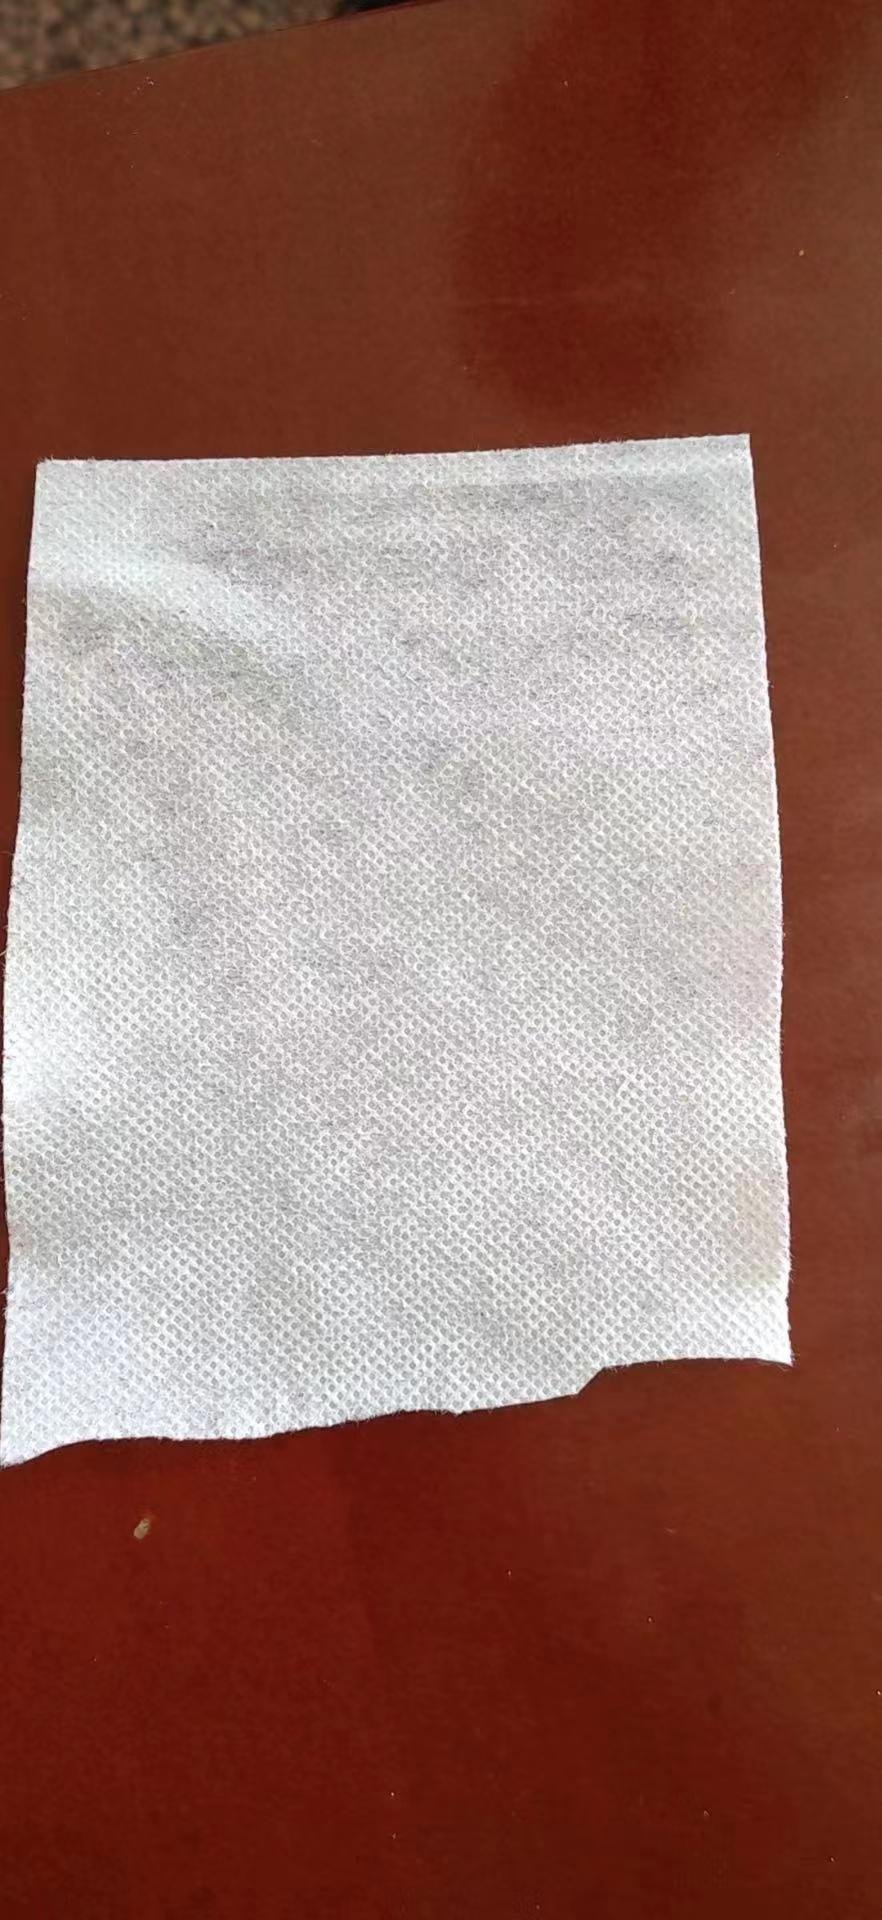 Spunlace Nonwoven Fabric for Wet wipes,Baby Wipes,Cleaning Wipes 4